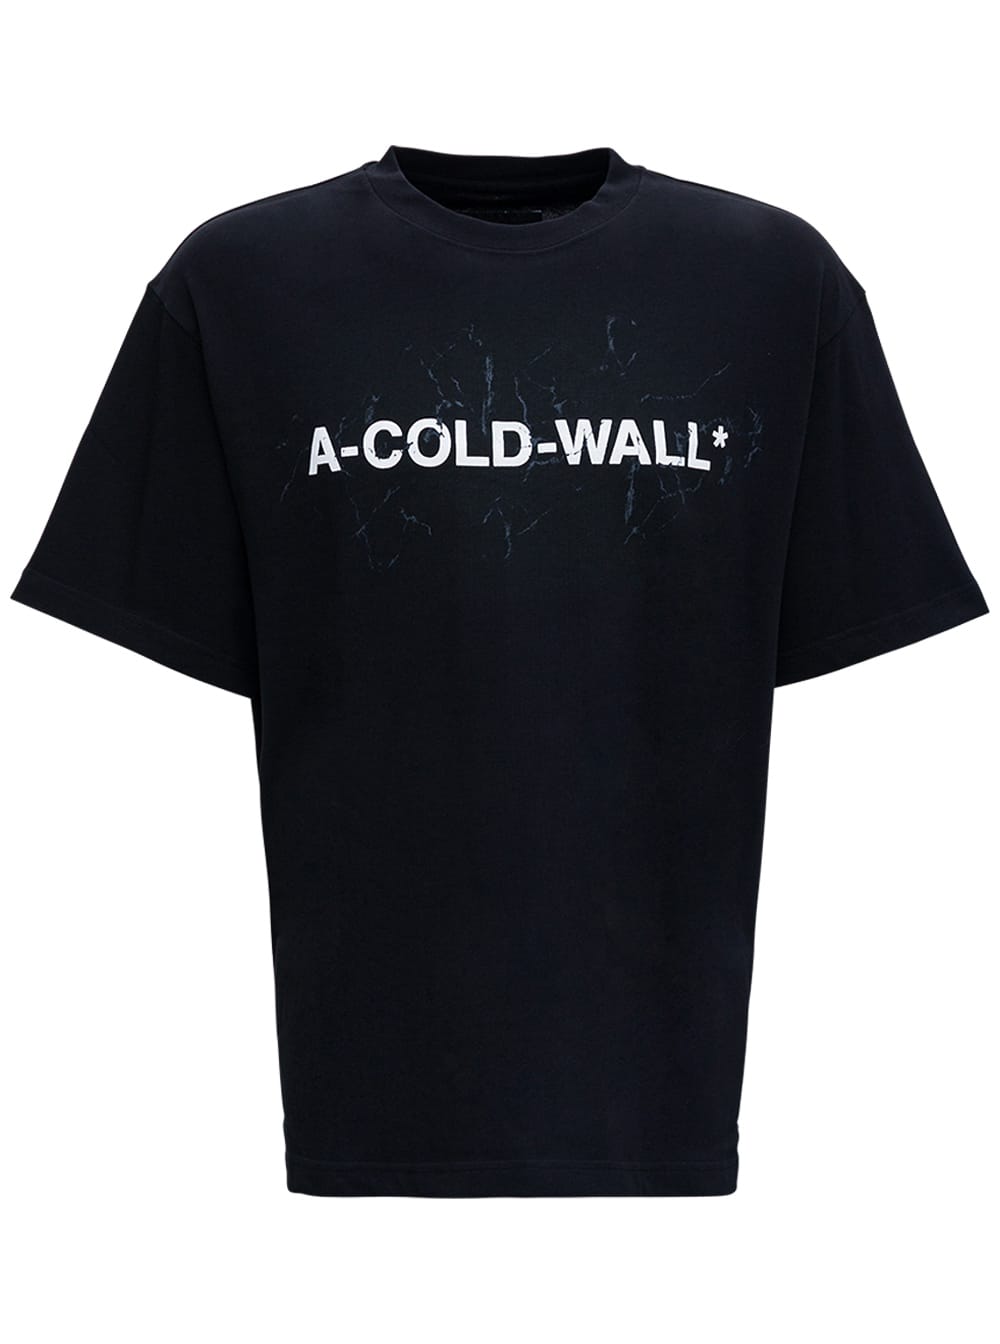 A-COLD-WALL Black Jersey T-shirt With Logo